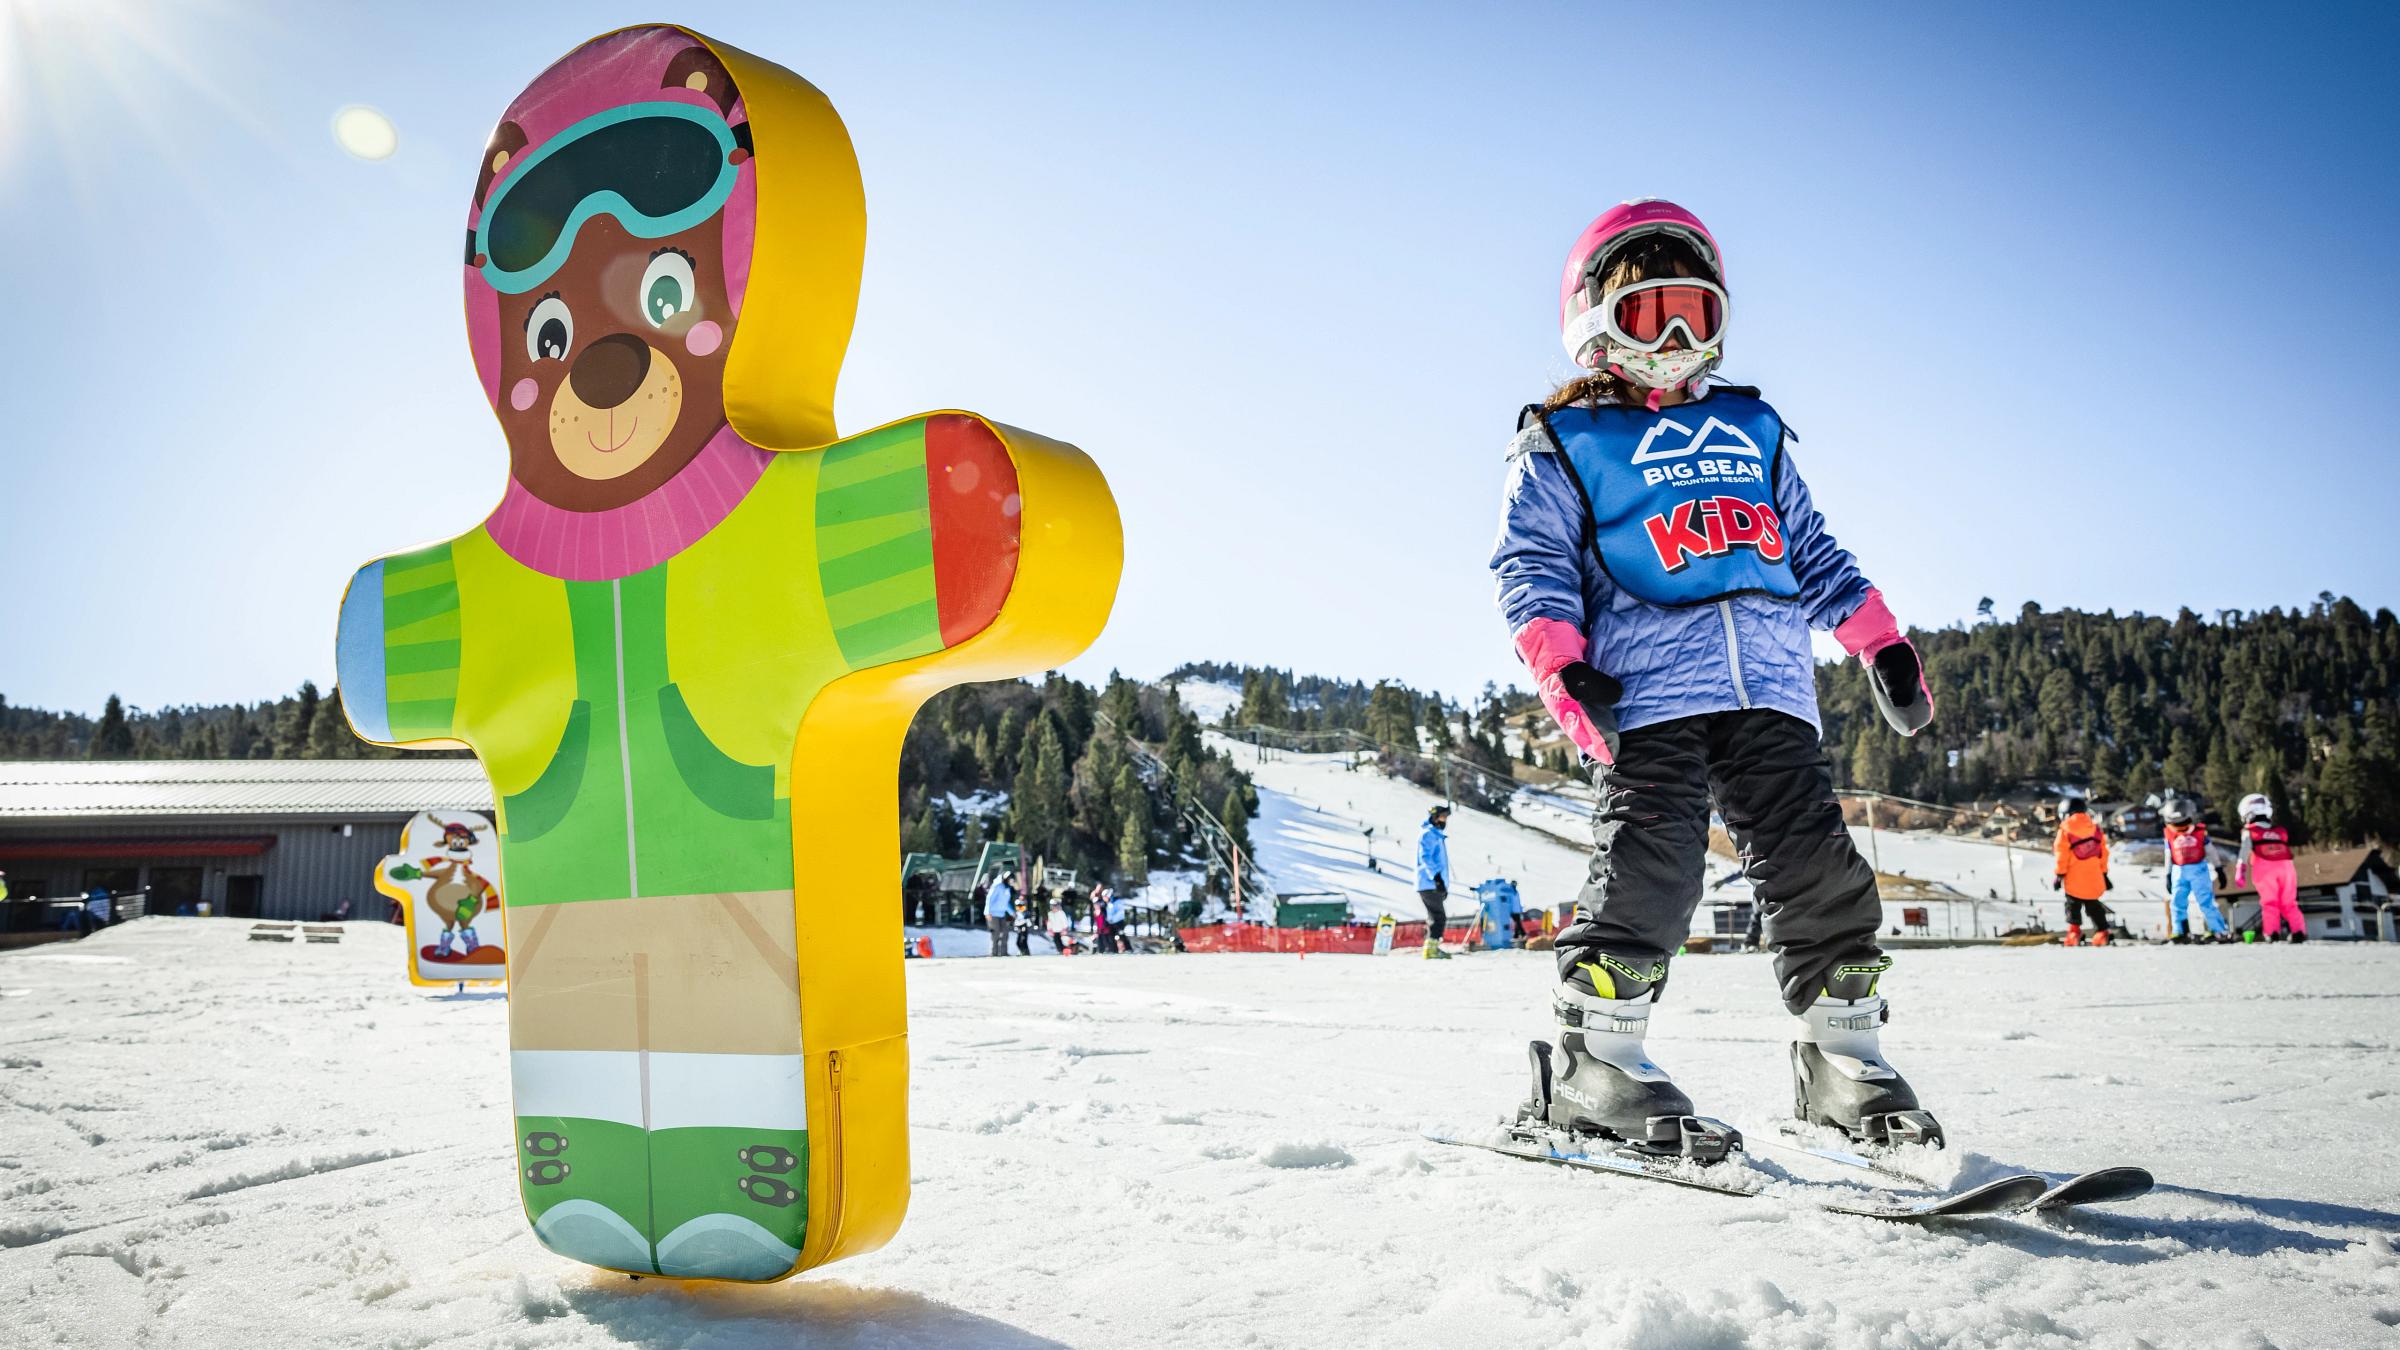 Young skier taking next to a beary themed blow up for practice.